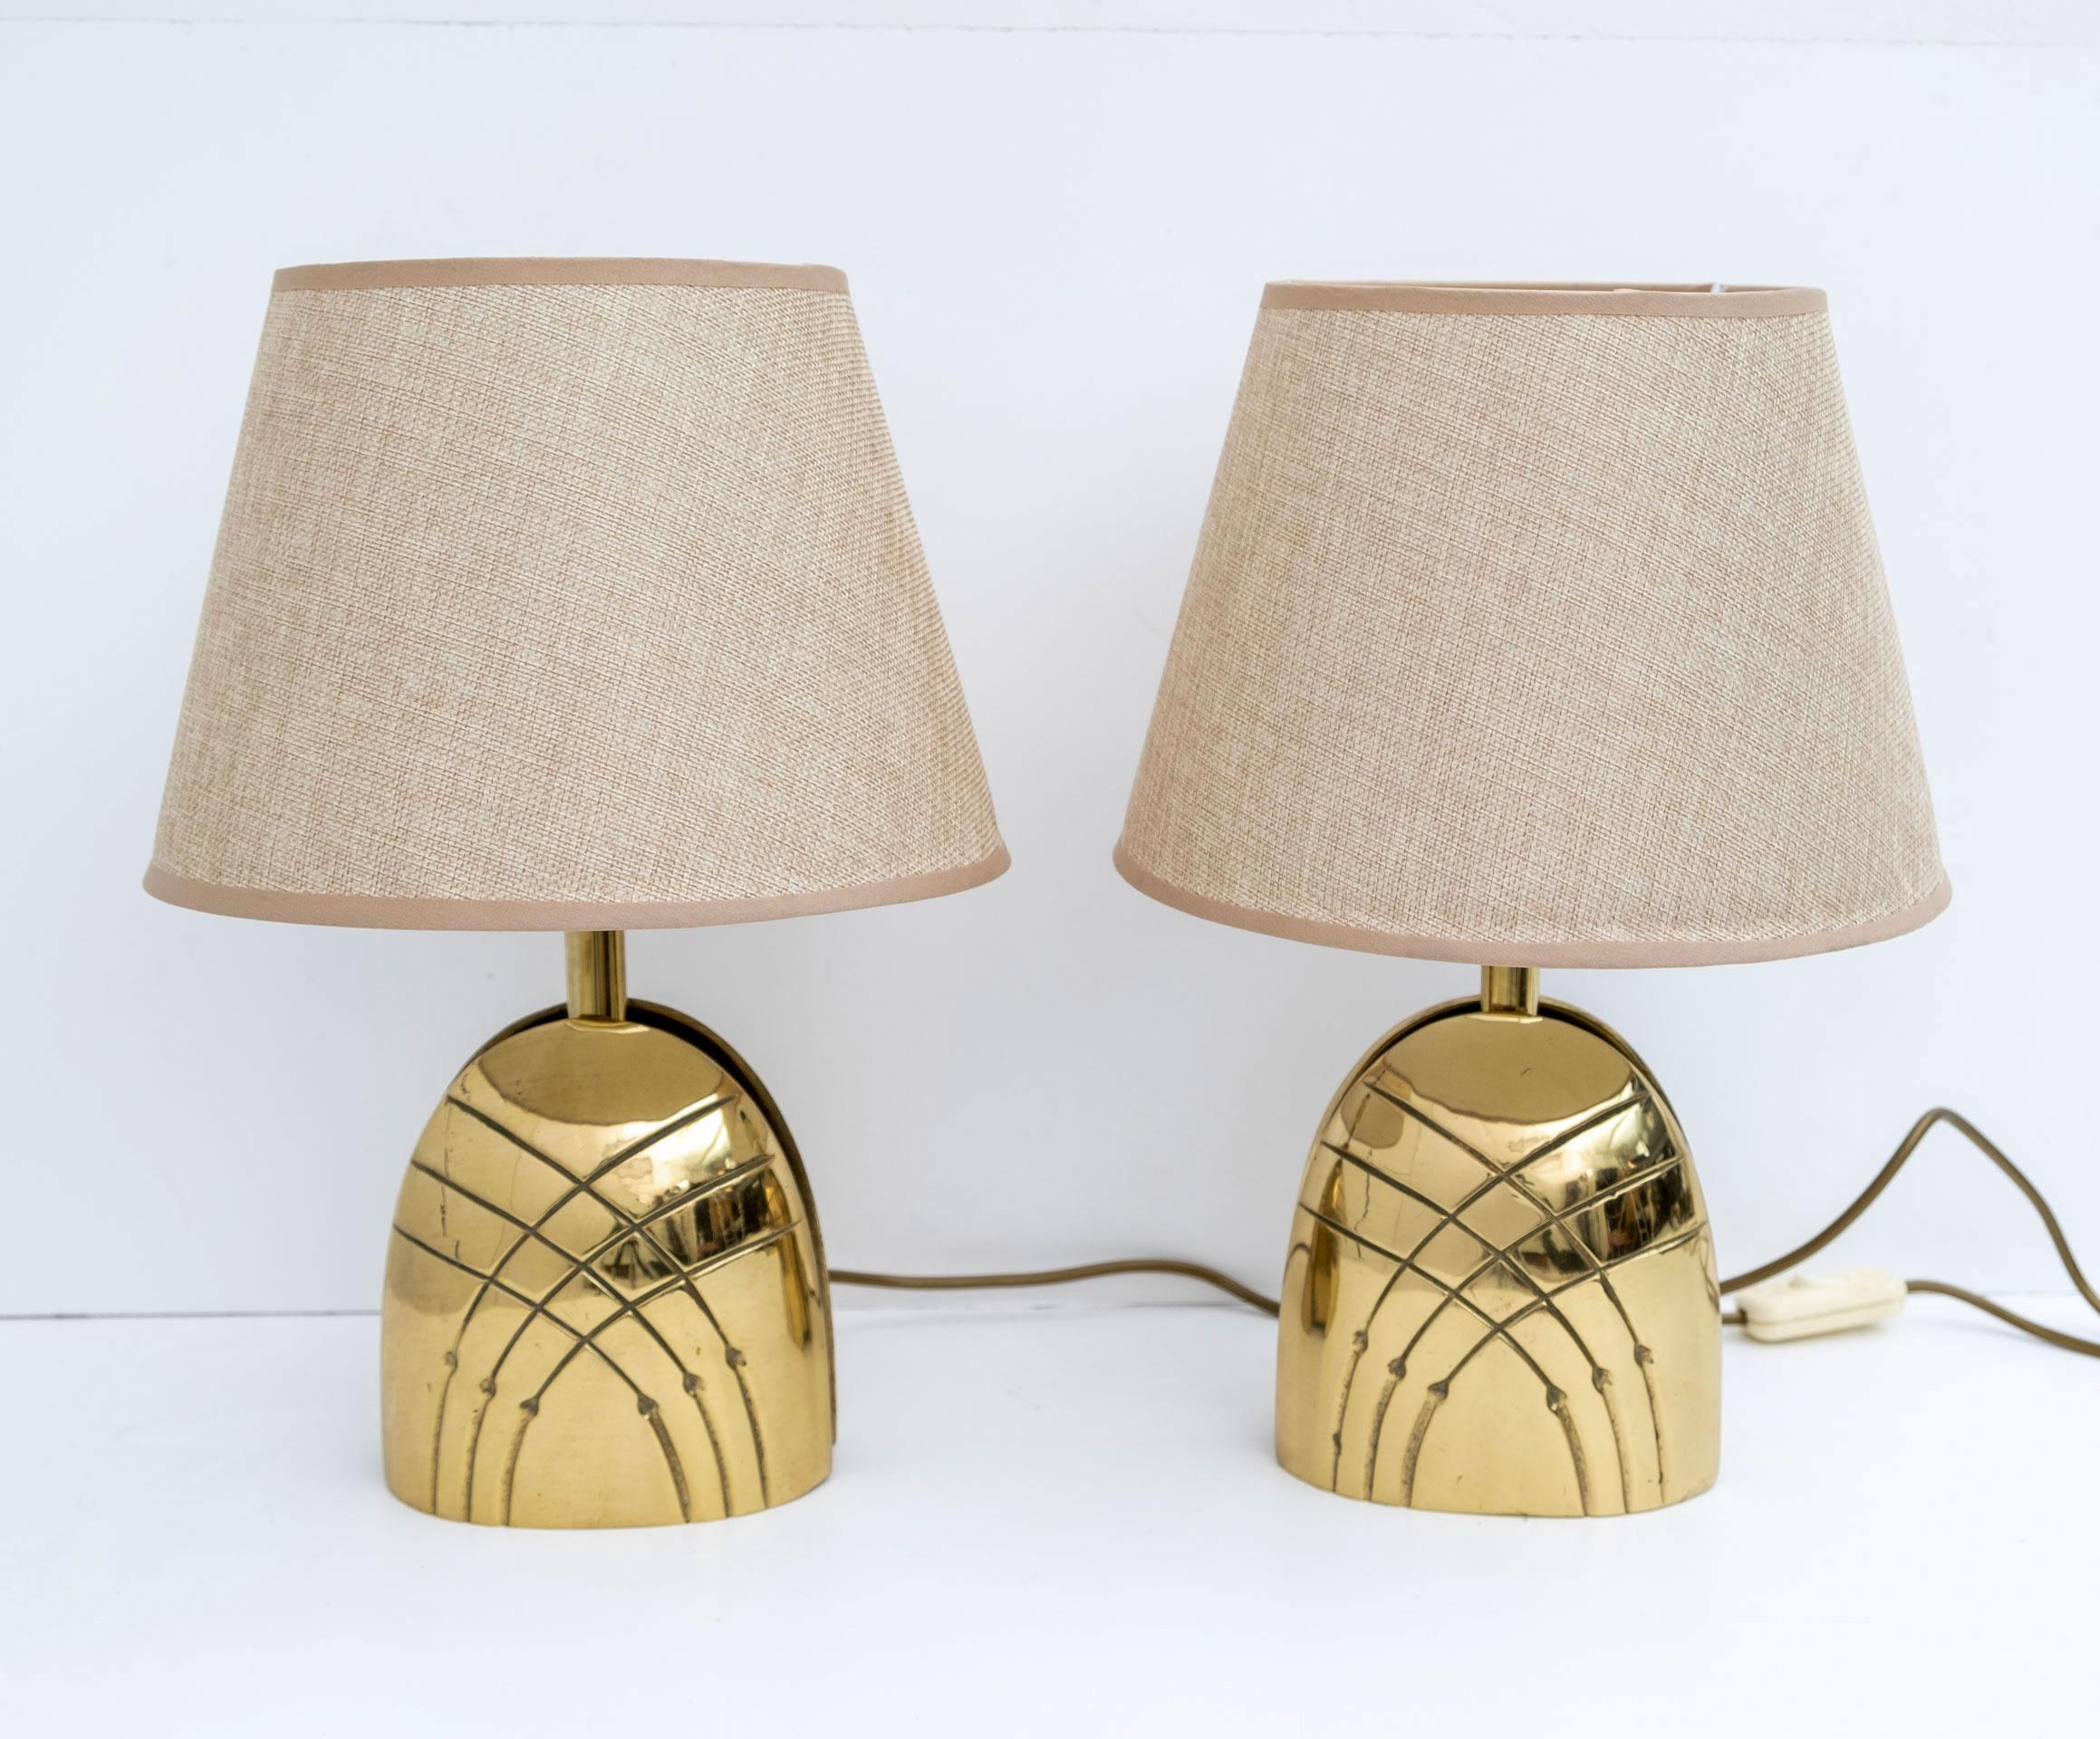 Beautiful pair of bedside lamps, Italian manufacture from the 70s. Cast brass, the bases measure cm: W14 x D9 x H23.